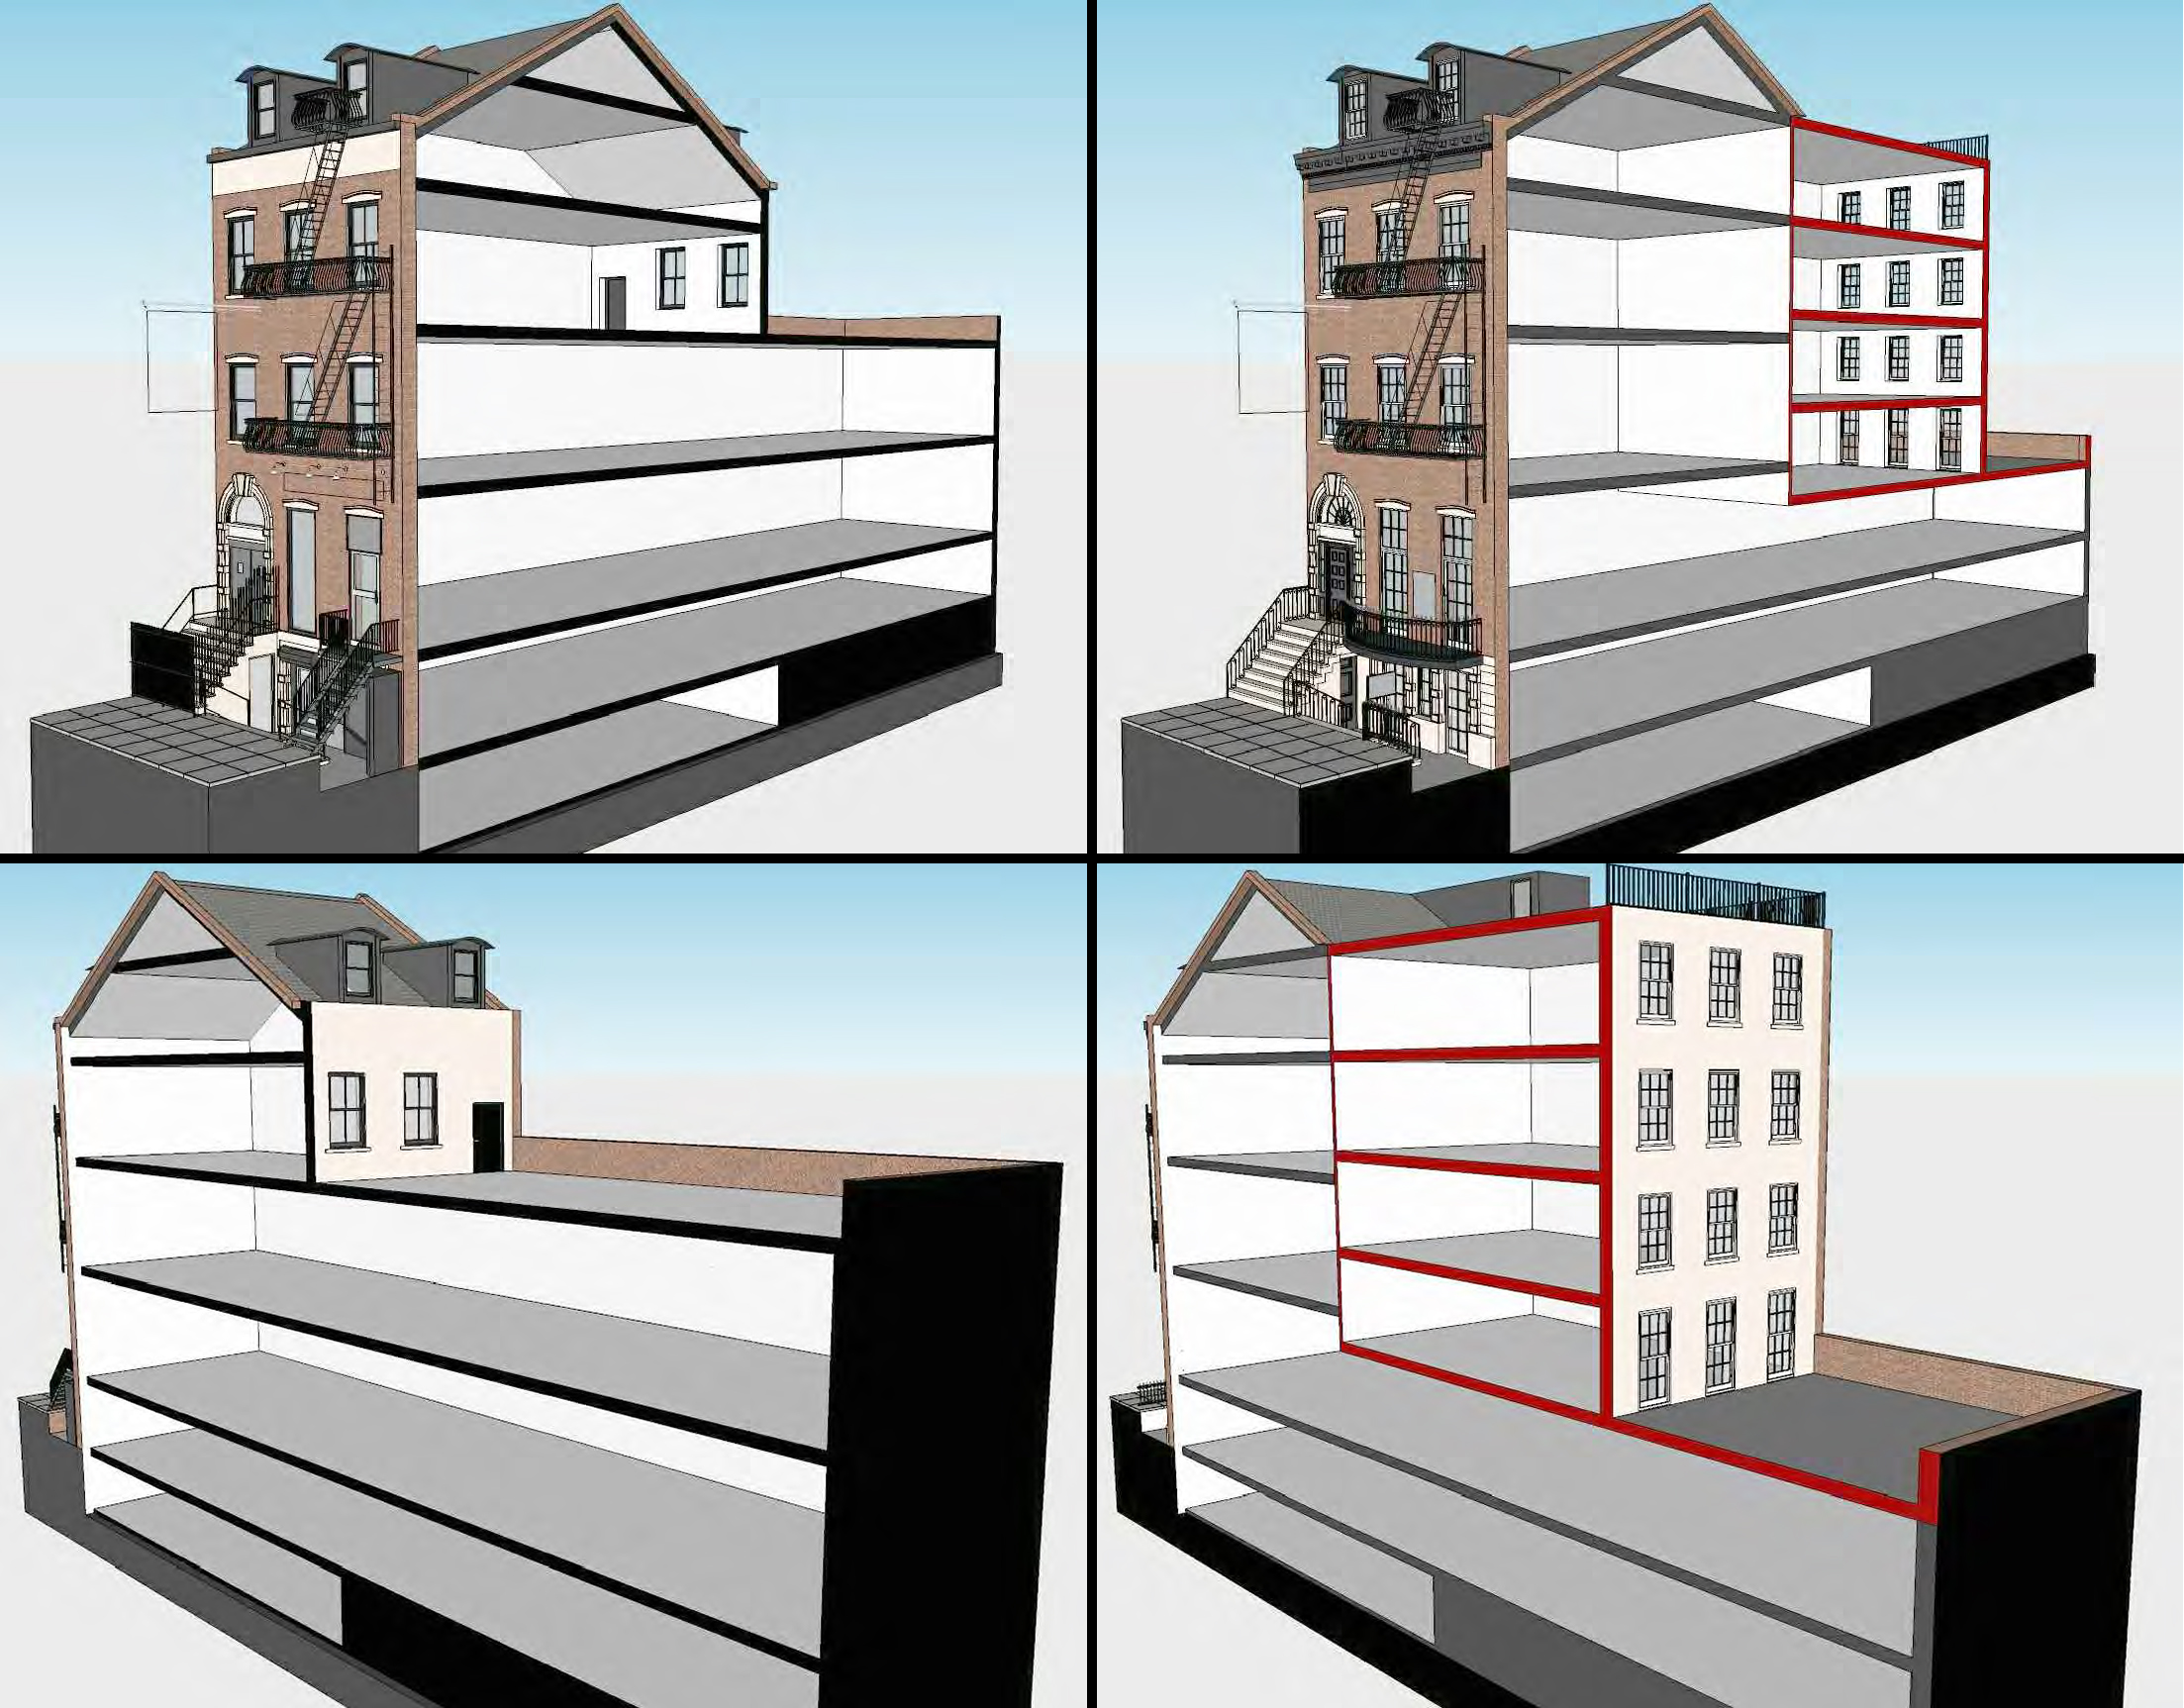 Sectioned renderings of the Hamilton-Holly House at 4 St. Mark's Place, existing and proposed